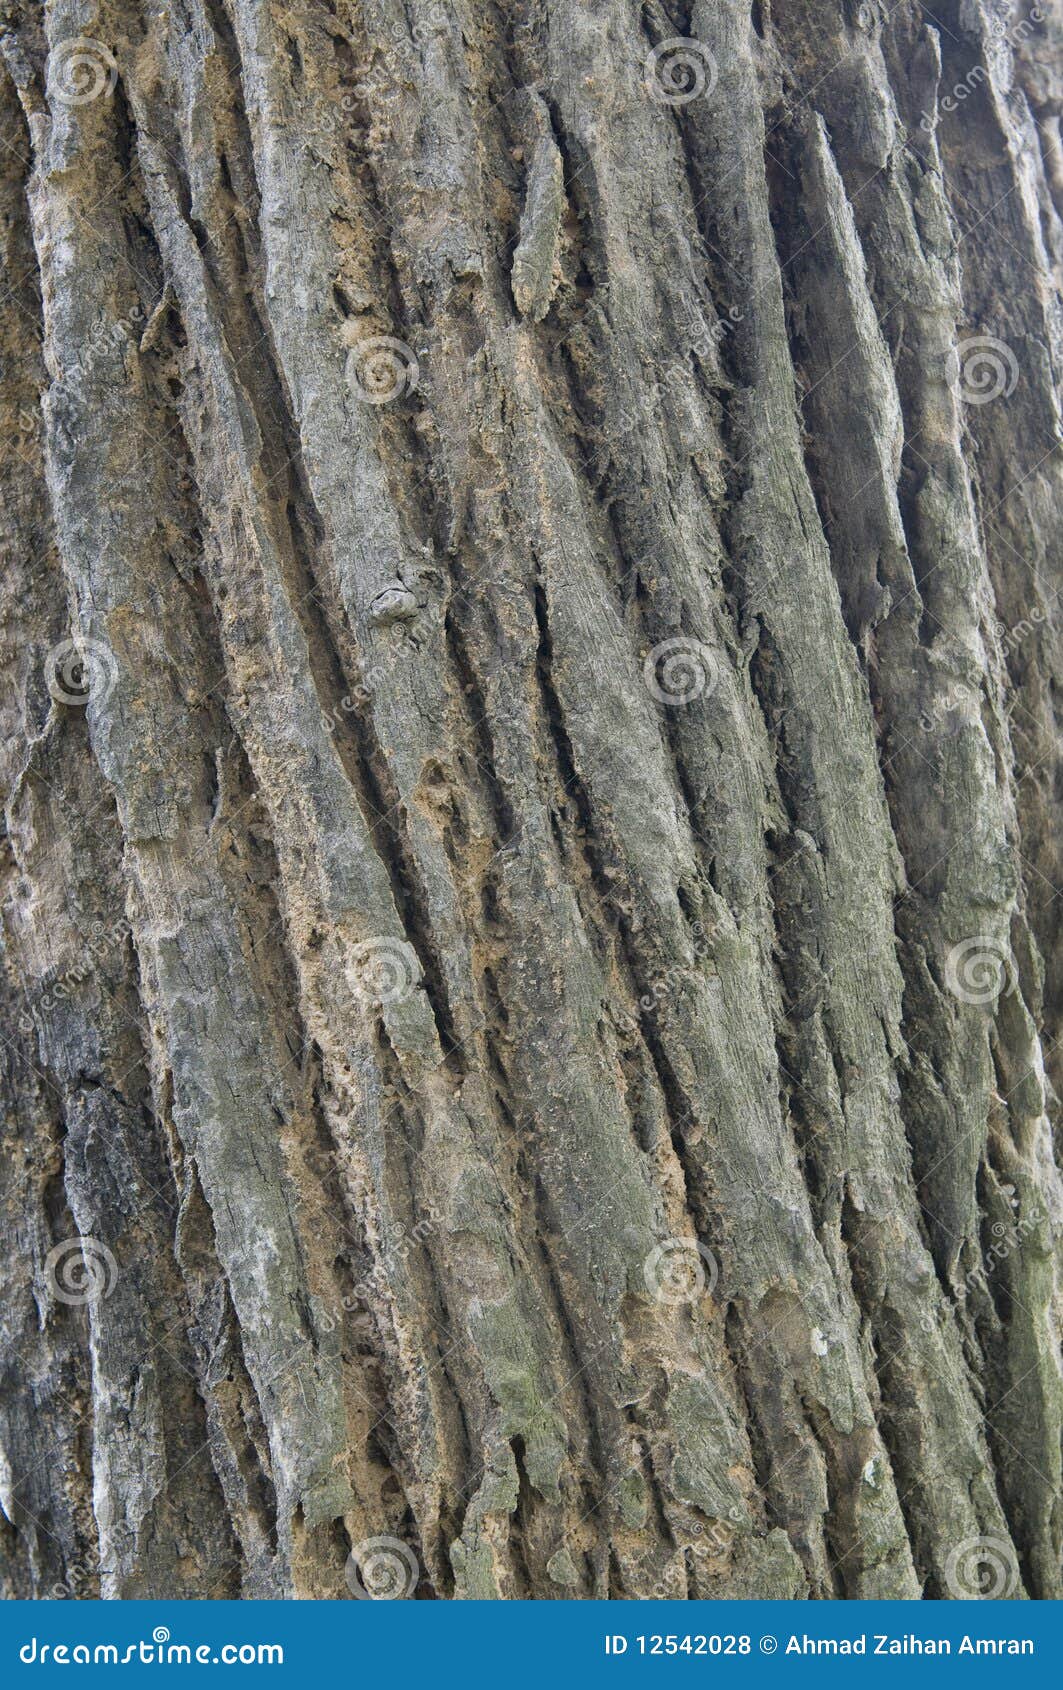 Line Pattern Of The Tree Bark Royalty Free Stock Photos Image 12542028